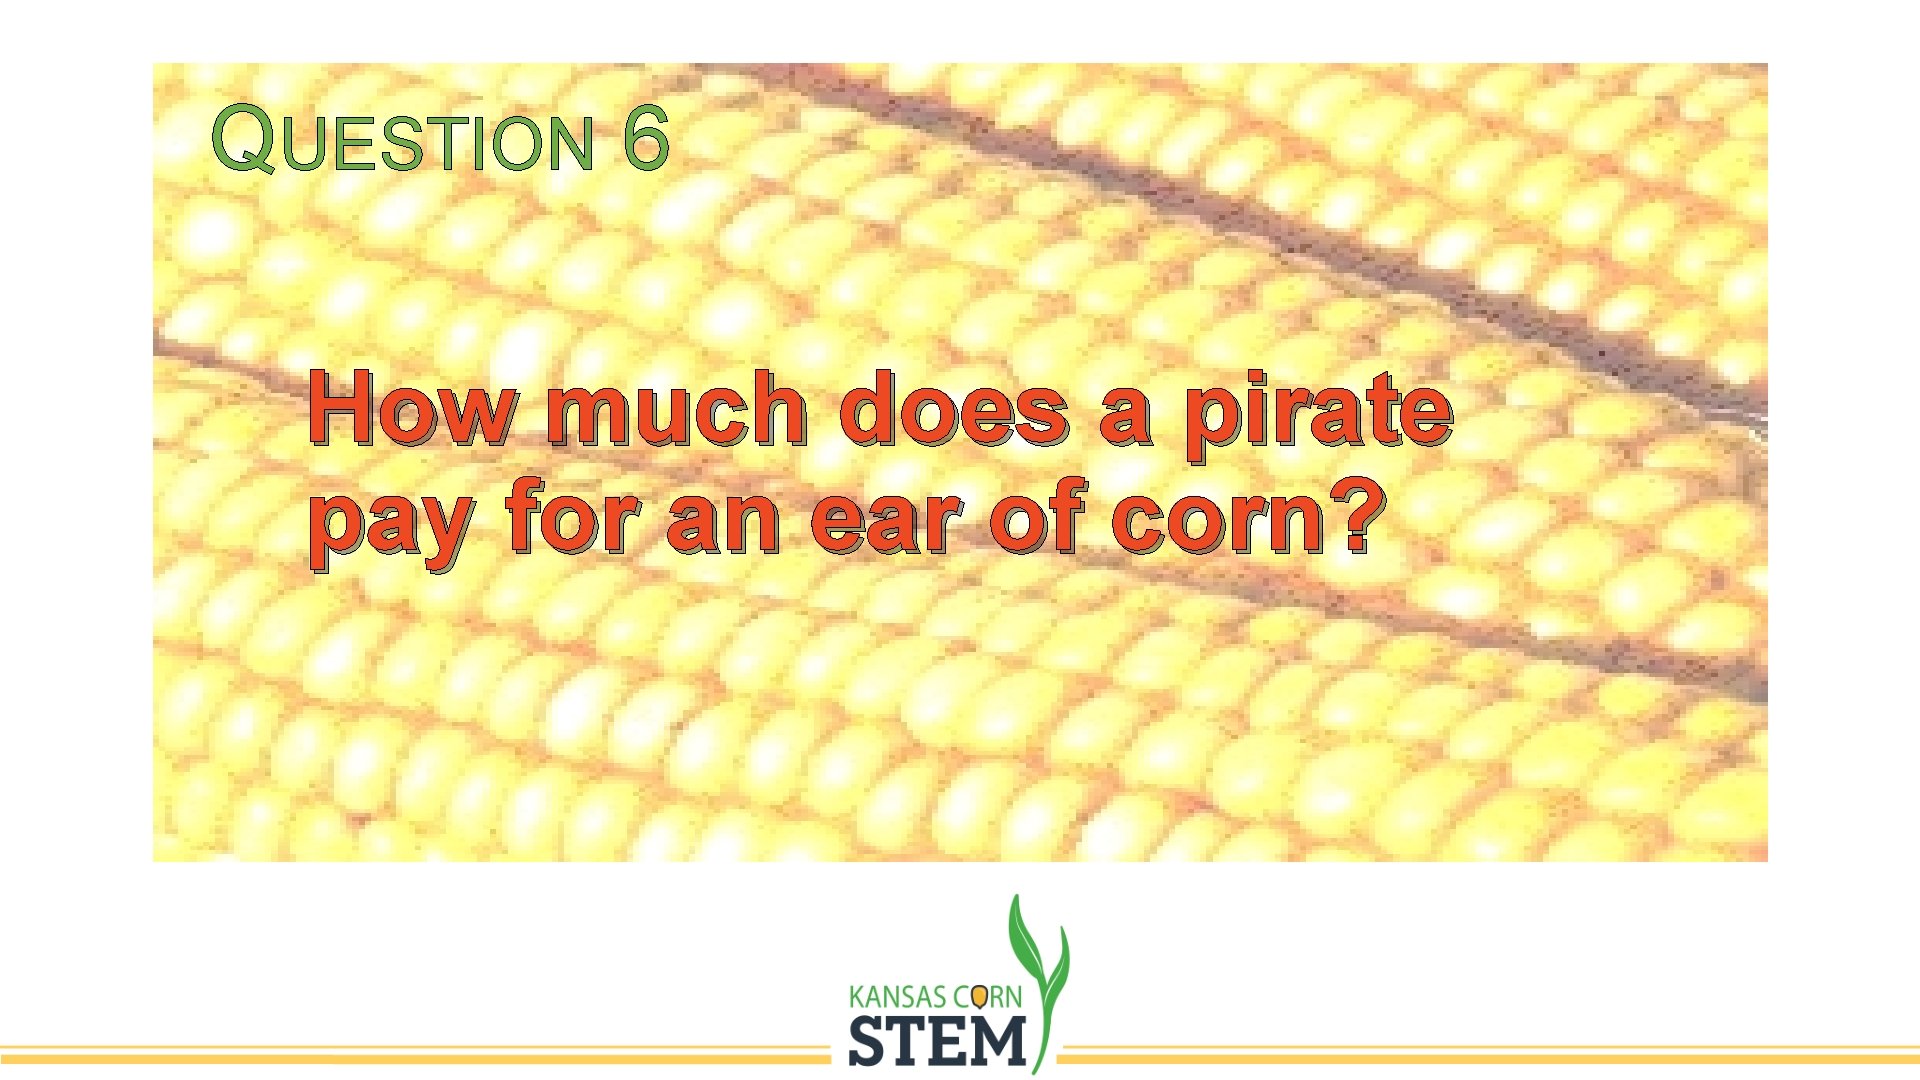 QUESTION 6 How much does a pirate pay for an ear of corn? 